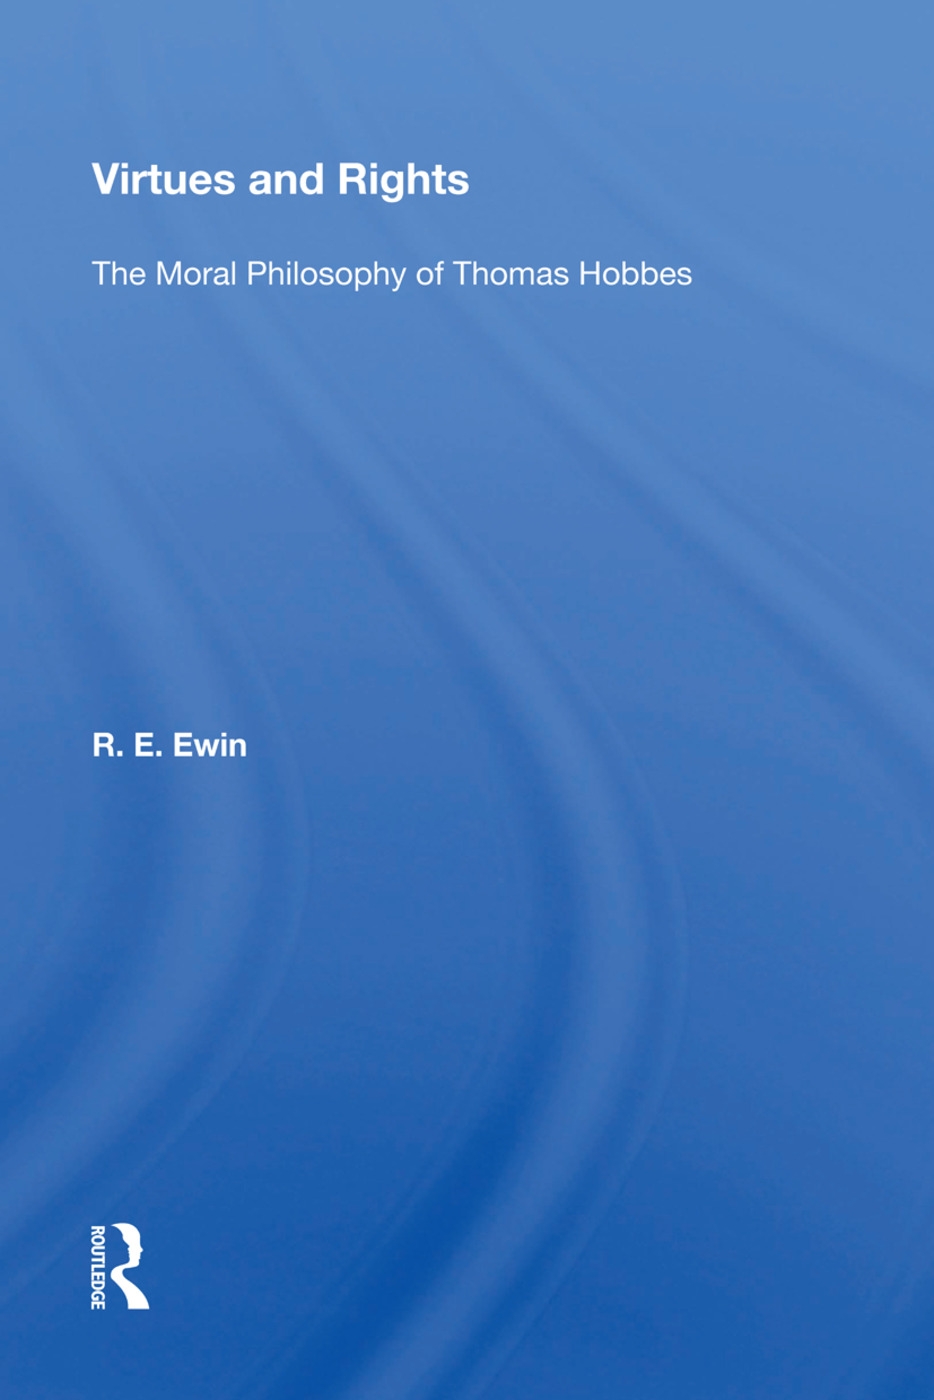 Virtues and Rights: The Moral Philosophy of Thomas Hobbes